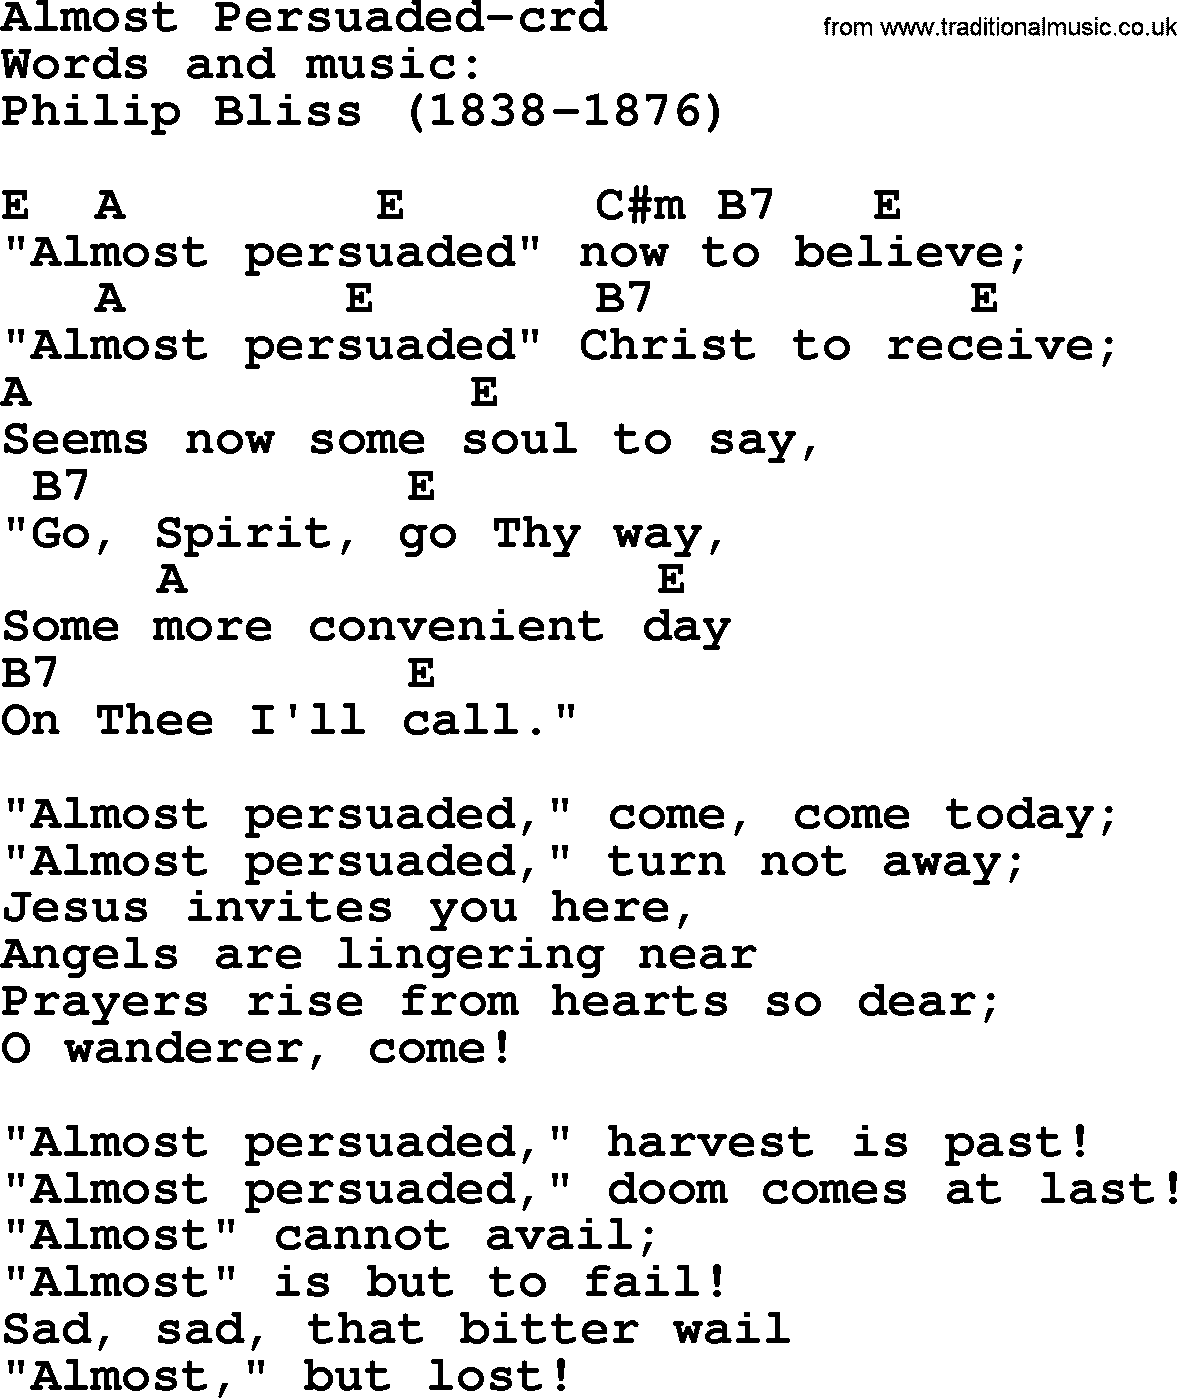 Top 500 Hymn: Almost Persuaded, lyrics and chords